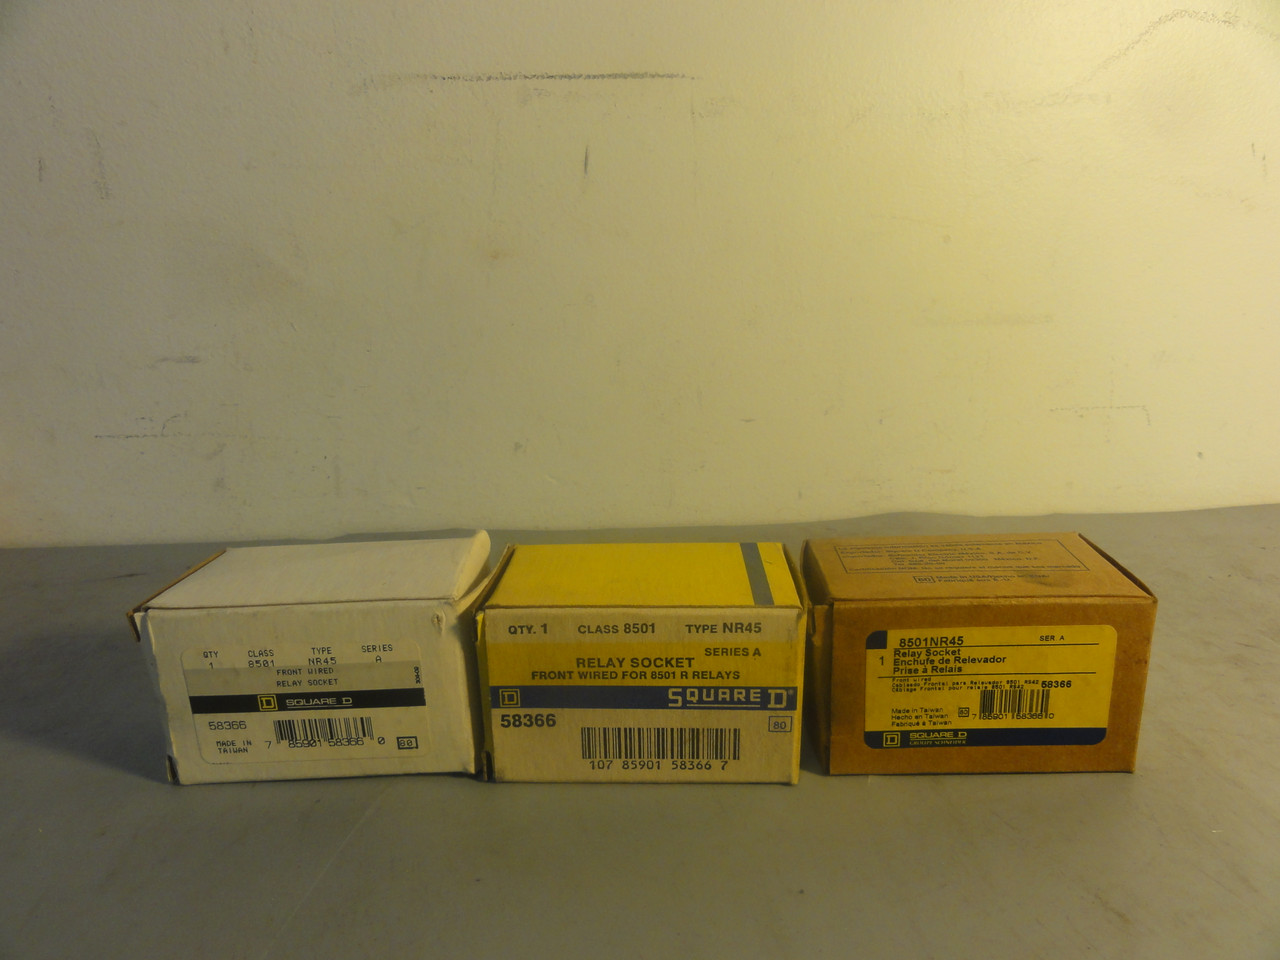 Square D Class 8501 Type NR45 Series A Relay Switch (Lot of 3) New (Open Box)